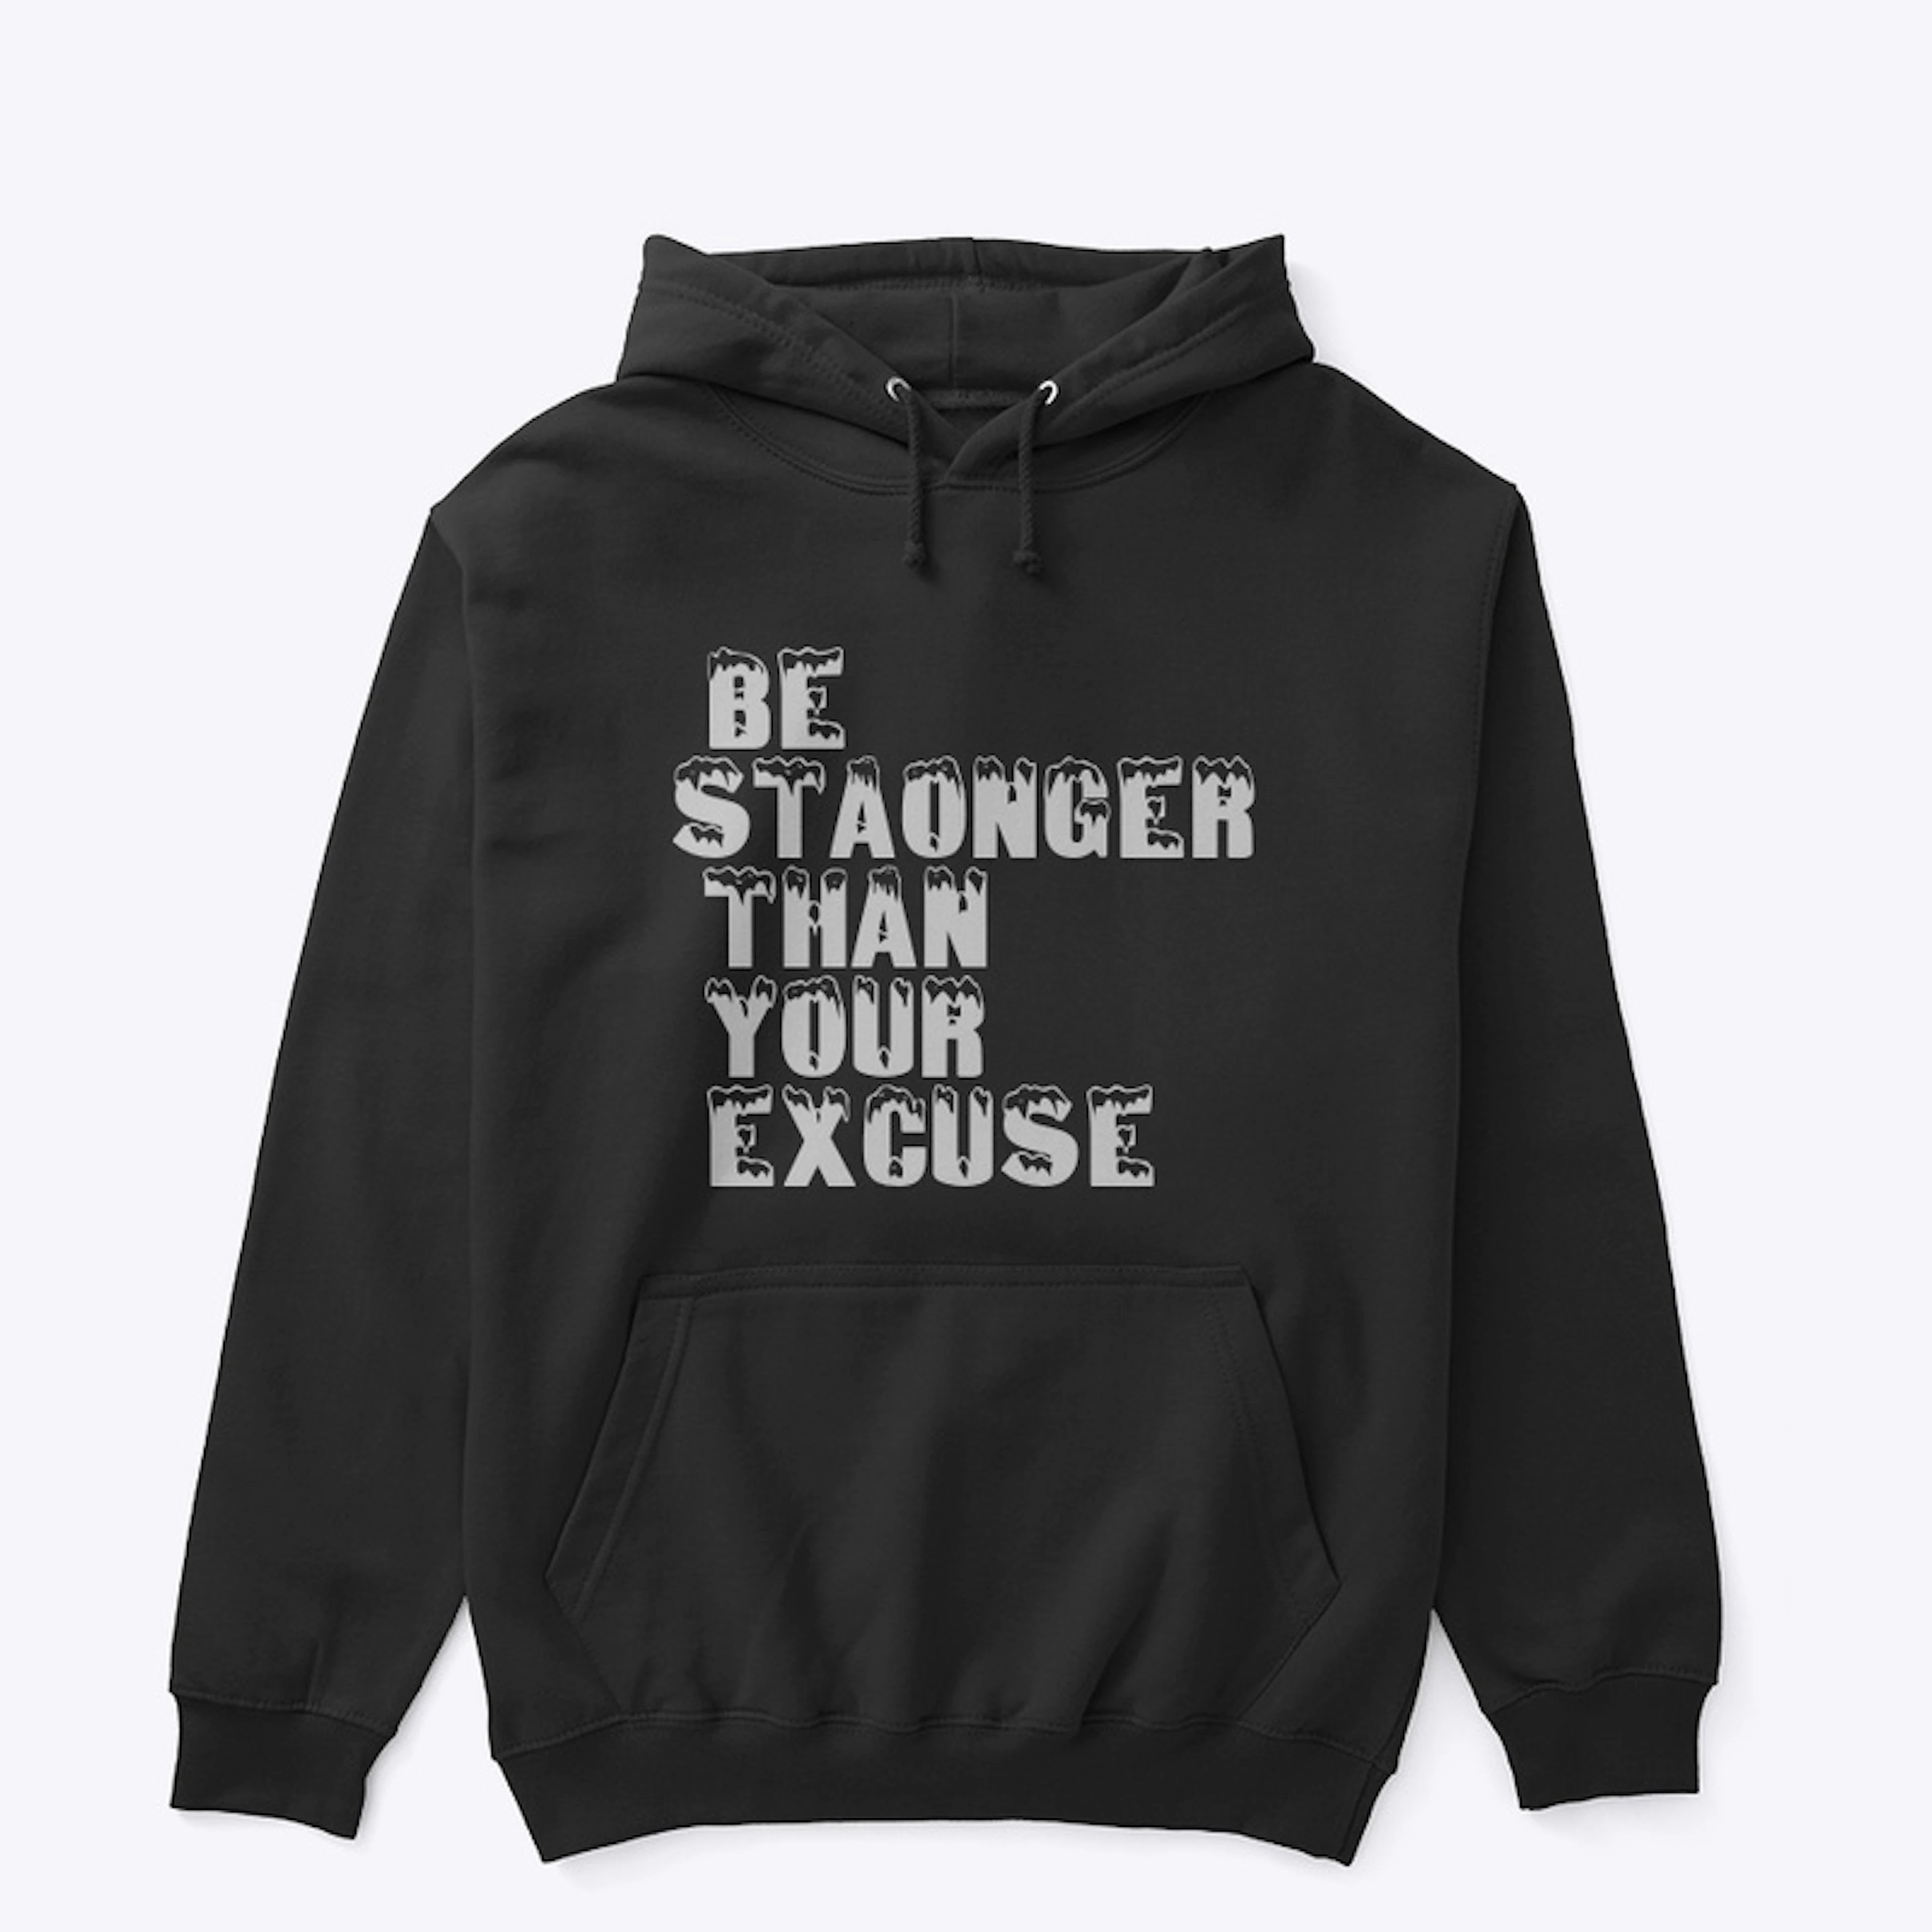 BE STAONGER THAN YOUR EXCUSE T-SHIRT 